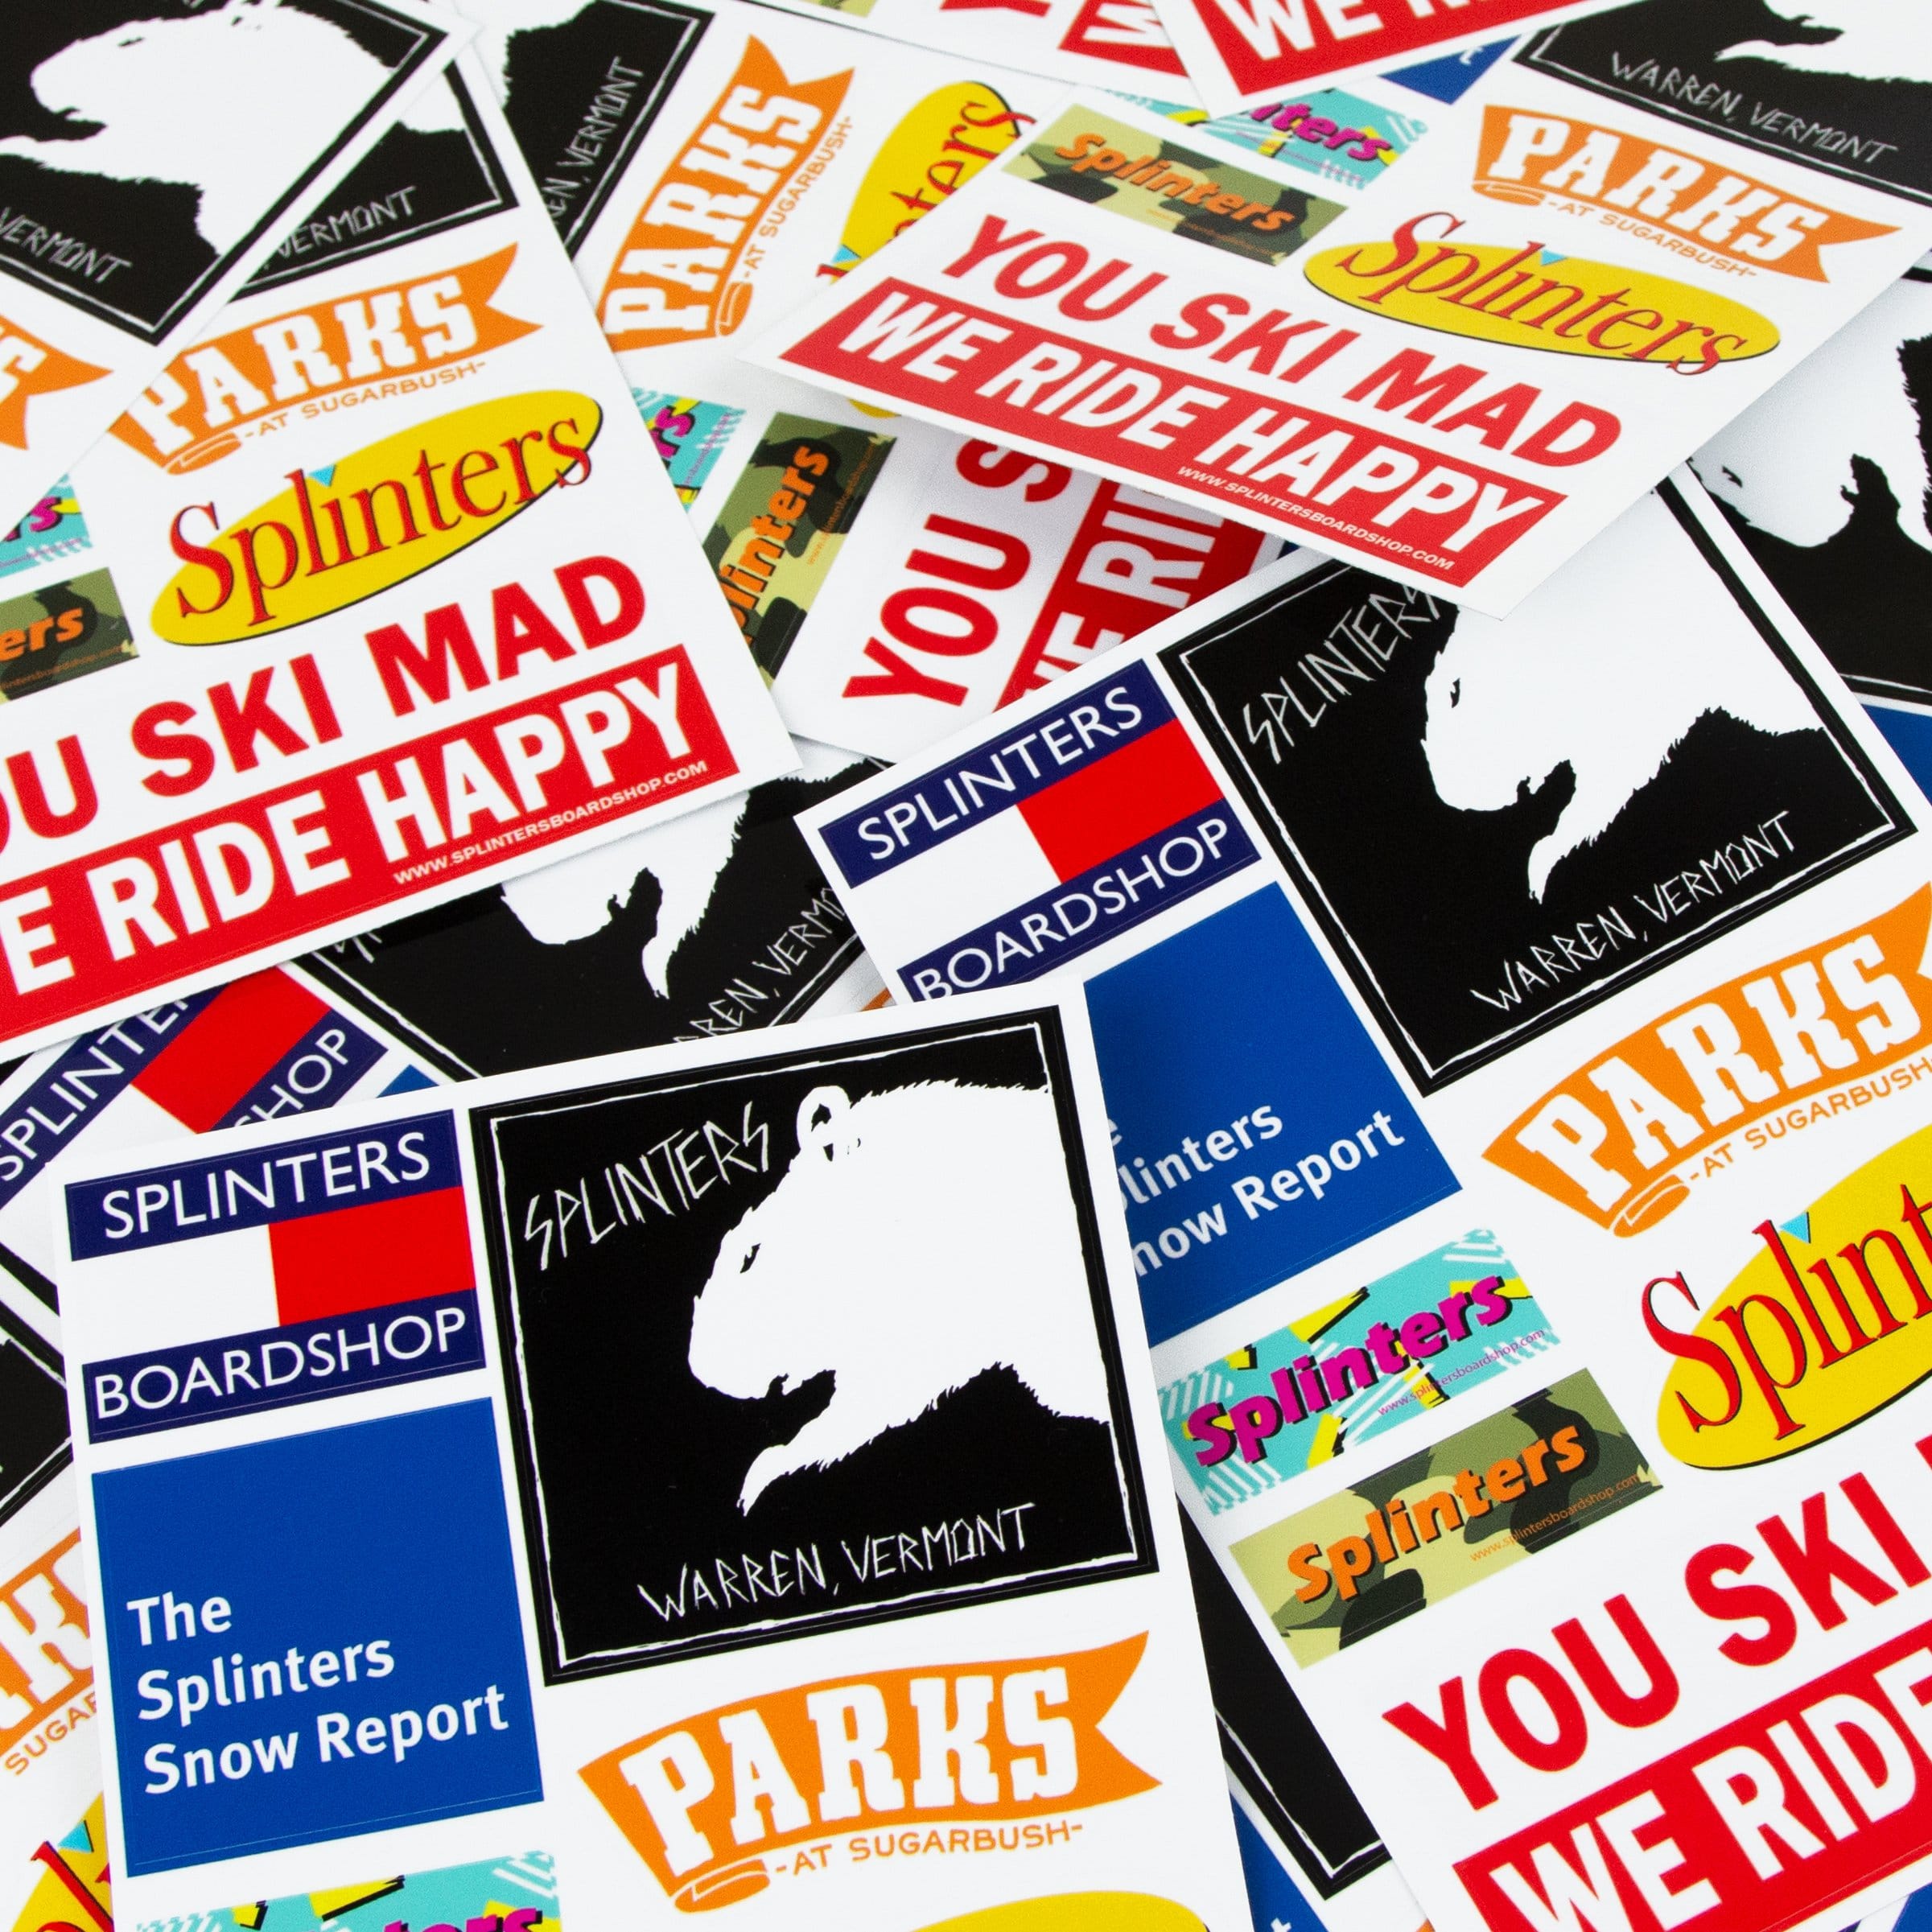 Sticker sheets of various vinyl stickers